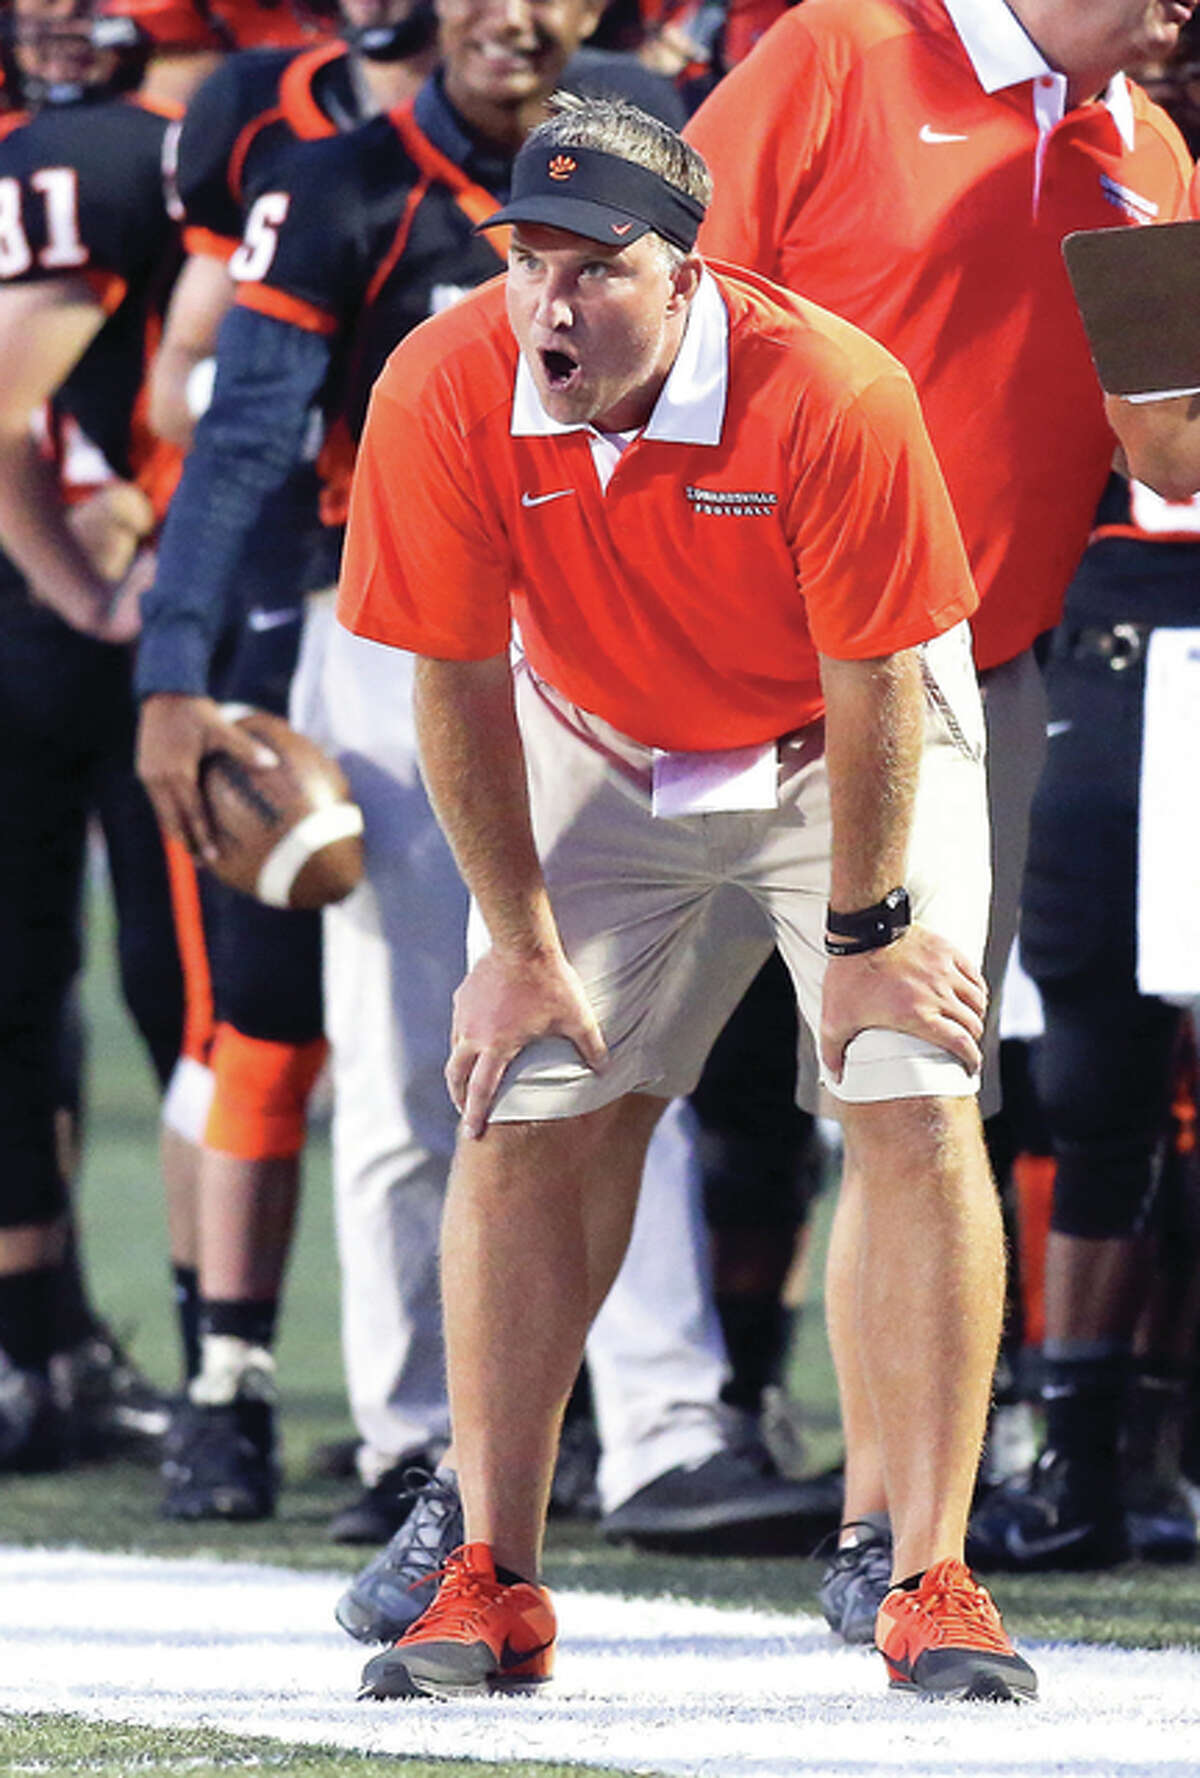 Edwardsville coach Matt Martin is looking for better execution from his team when the 4-0 Tigers play host to 3-1 Belleville East on Friday at the District 7 Sports Complex.